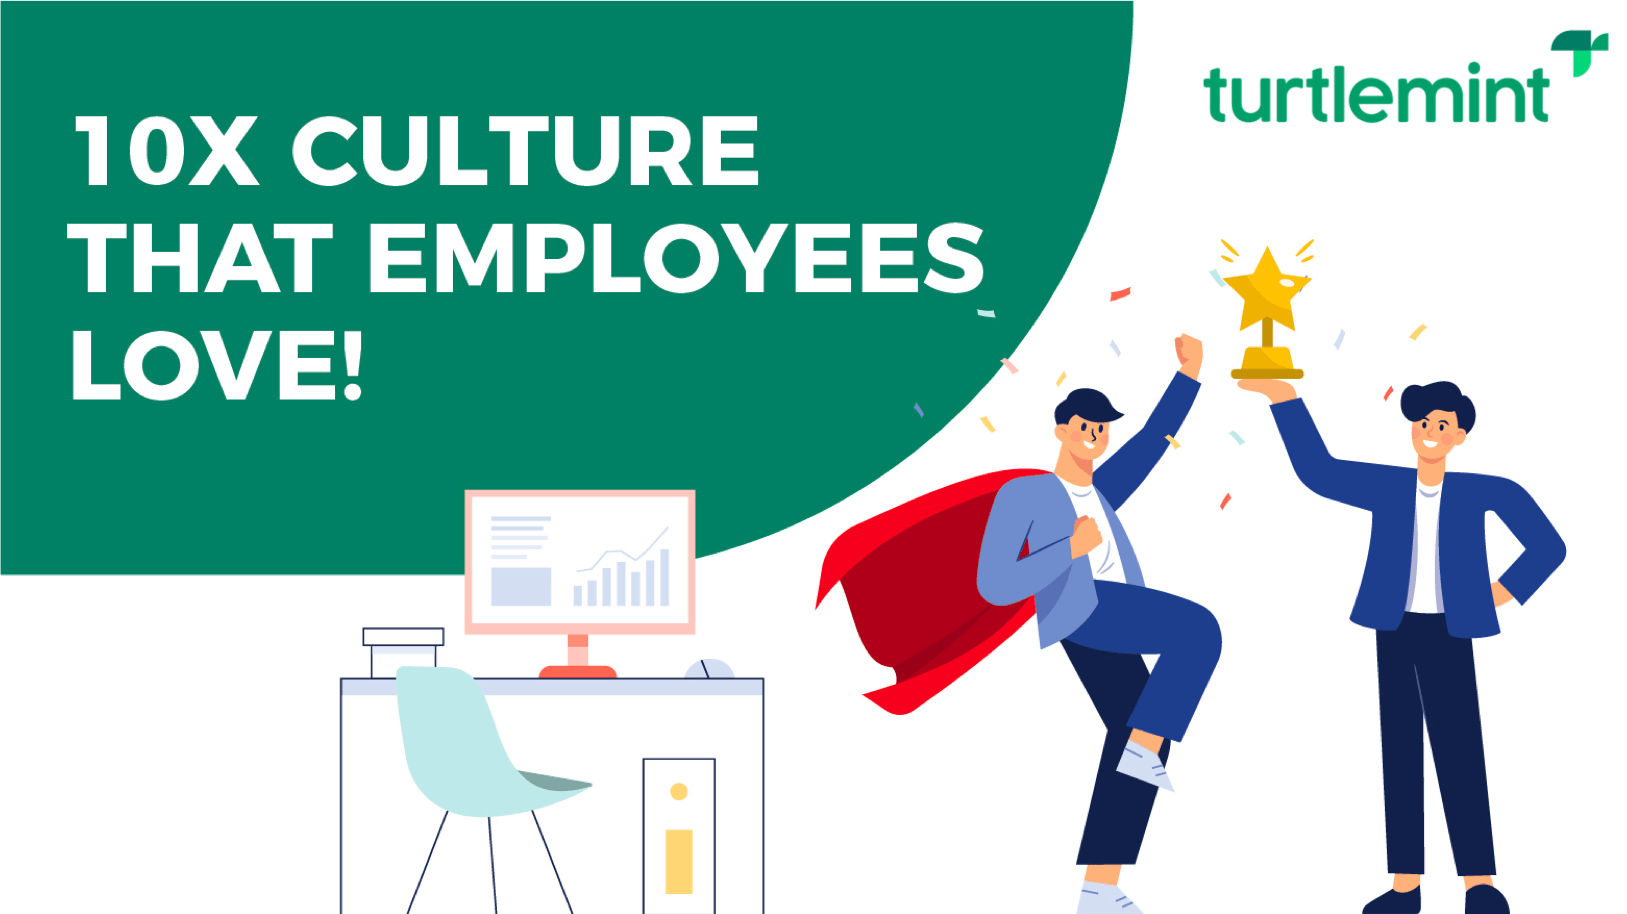 Turtlemint Recognized for Building “10X Culture that Employees Love!